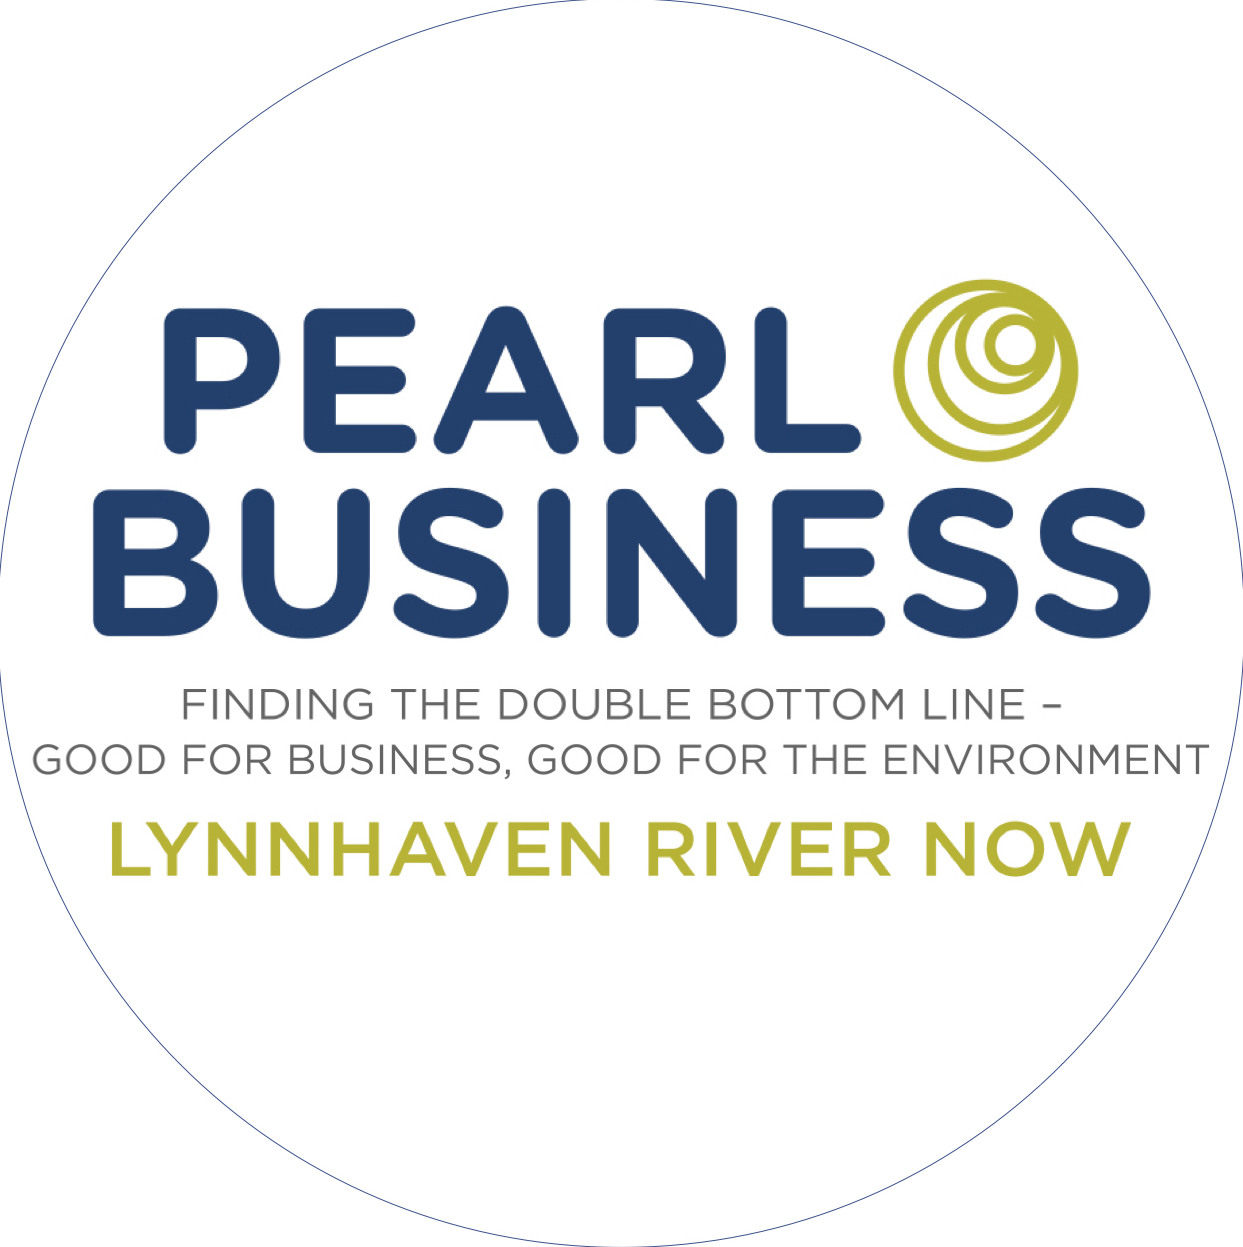 Pearl Business Lynnhaven river now logo